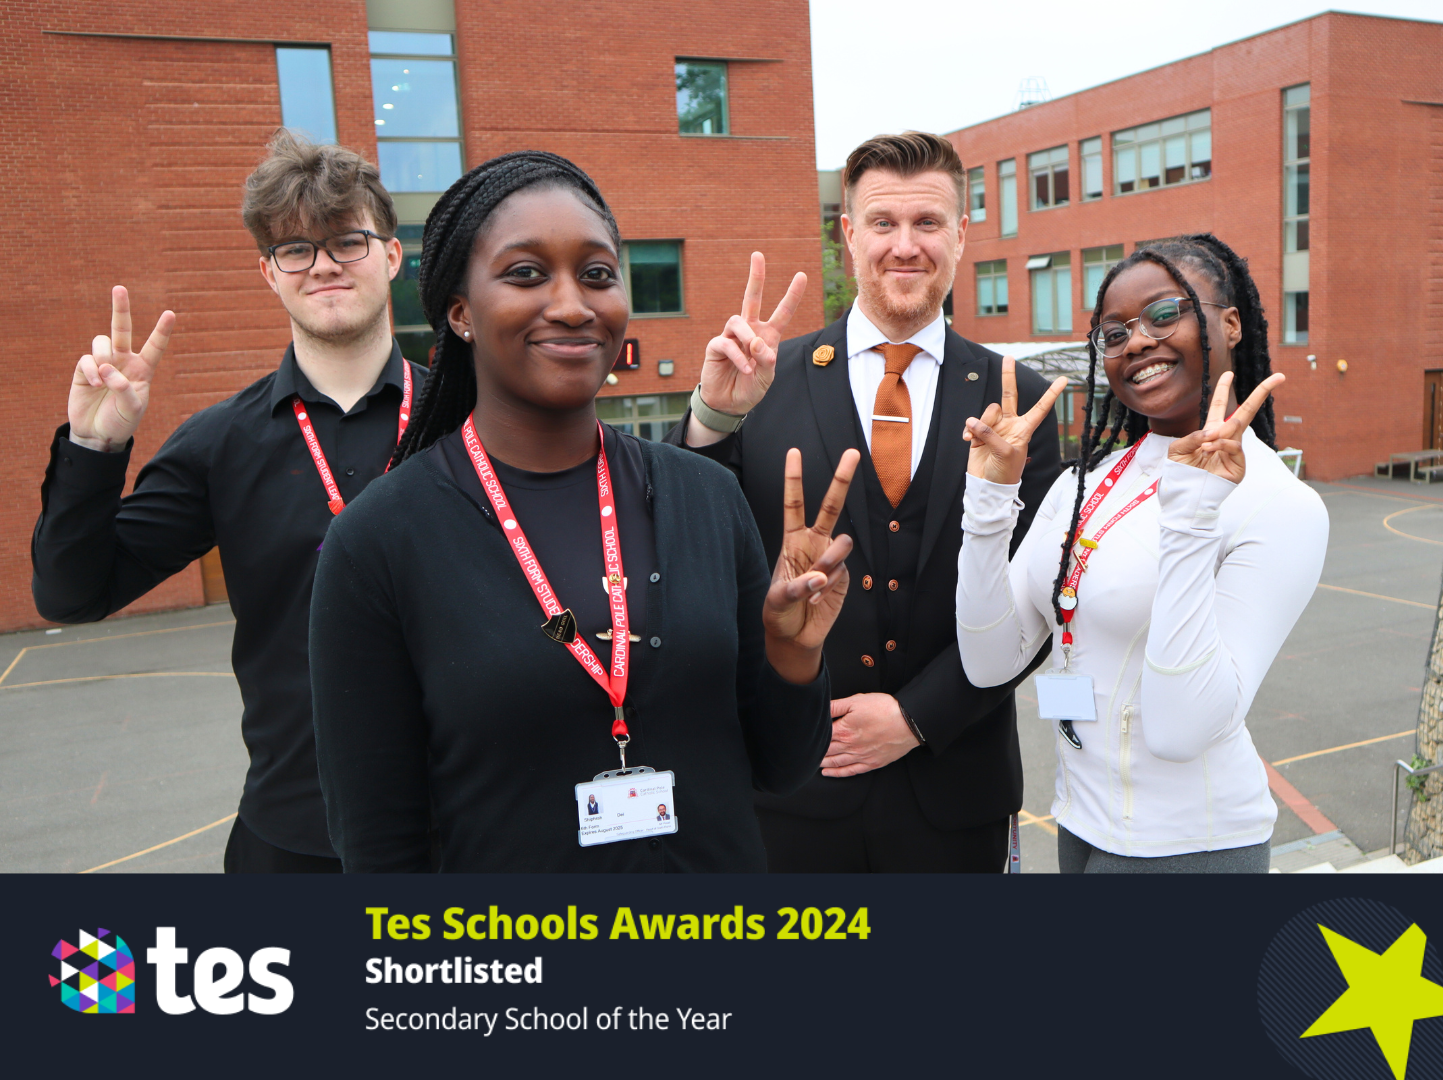 Cardinal Pole School shortlisted for School of the Year Award